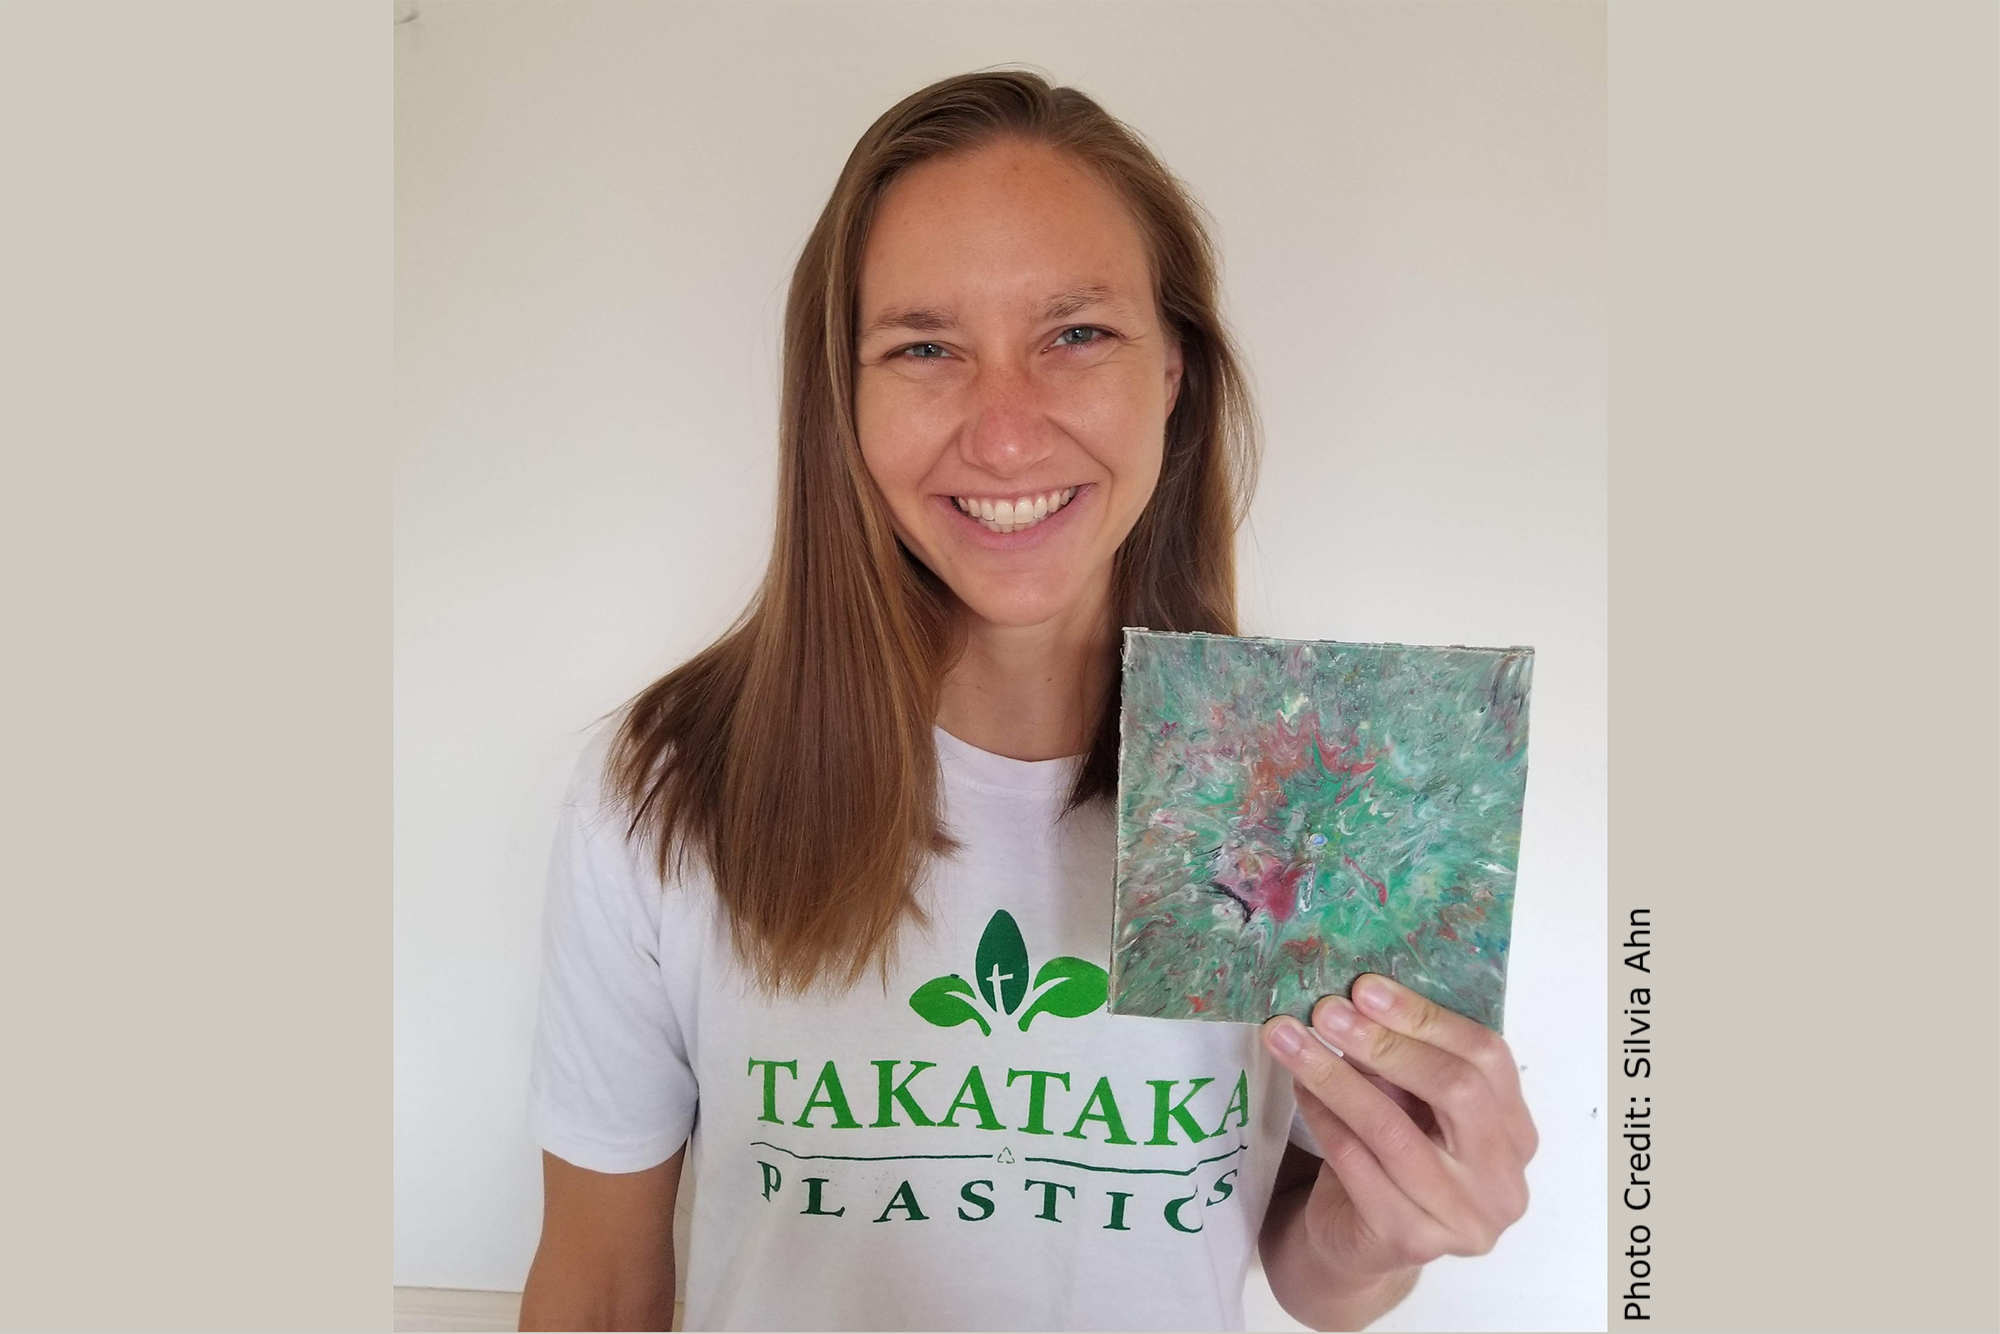 Paige Balcom of University of California, Berkeley with a wall tile made from her machines that convert PET plastic into useable, salable items.